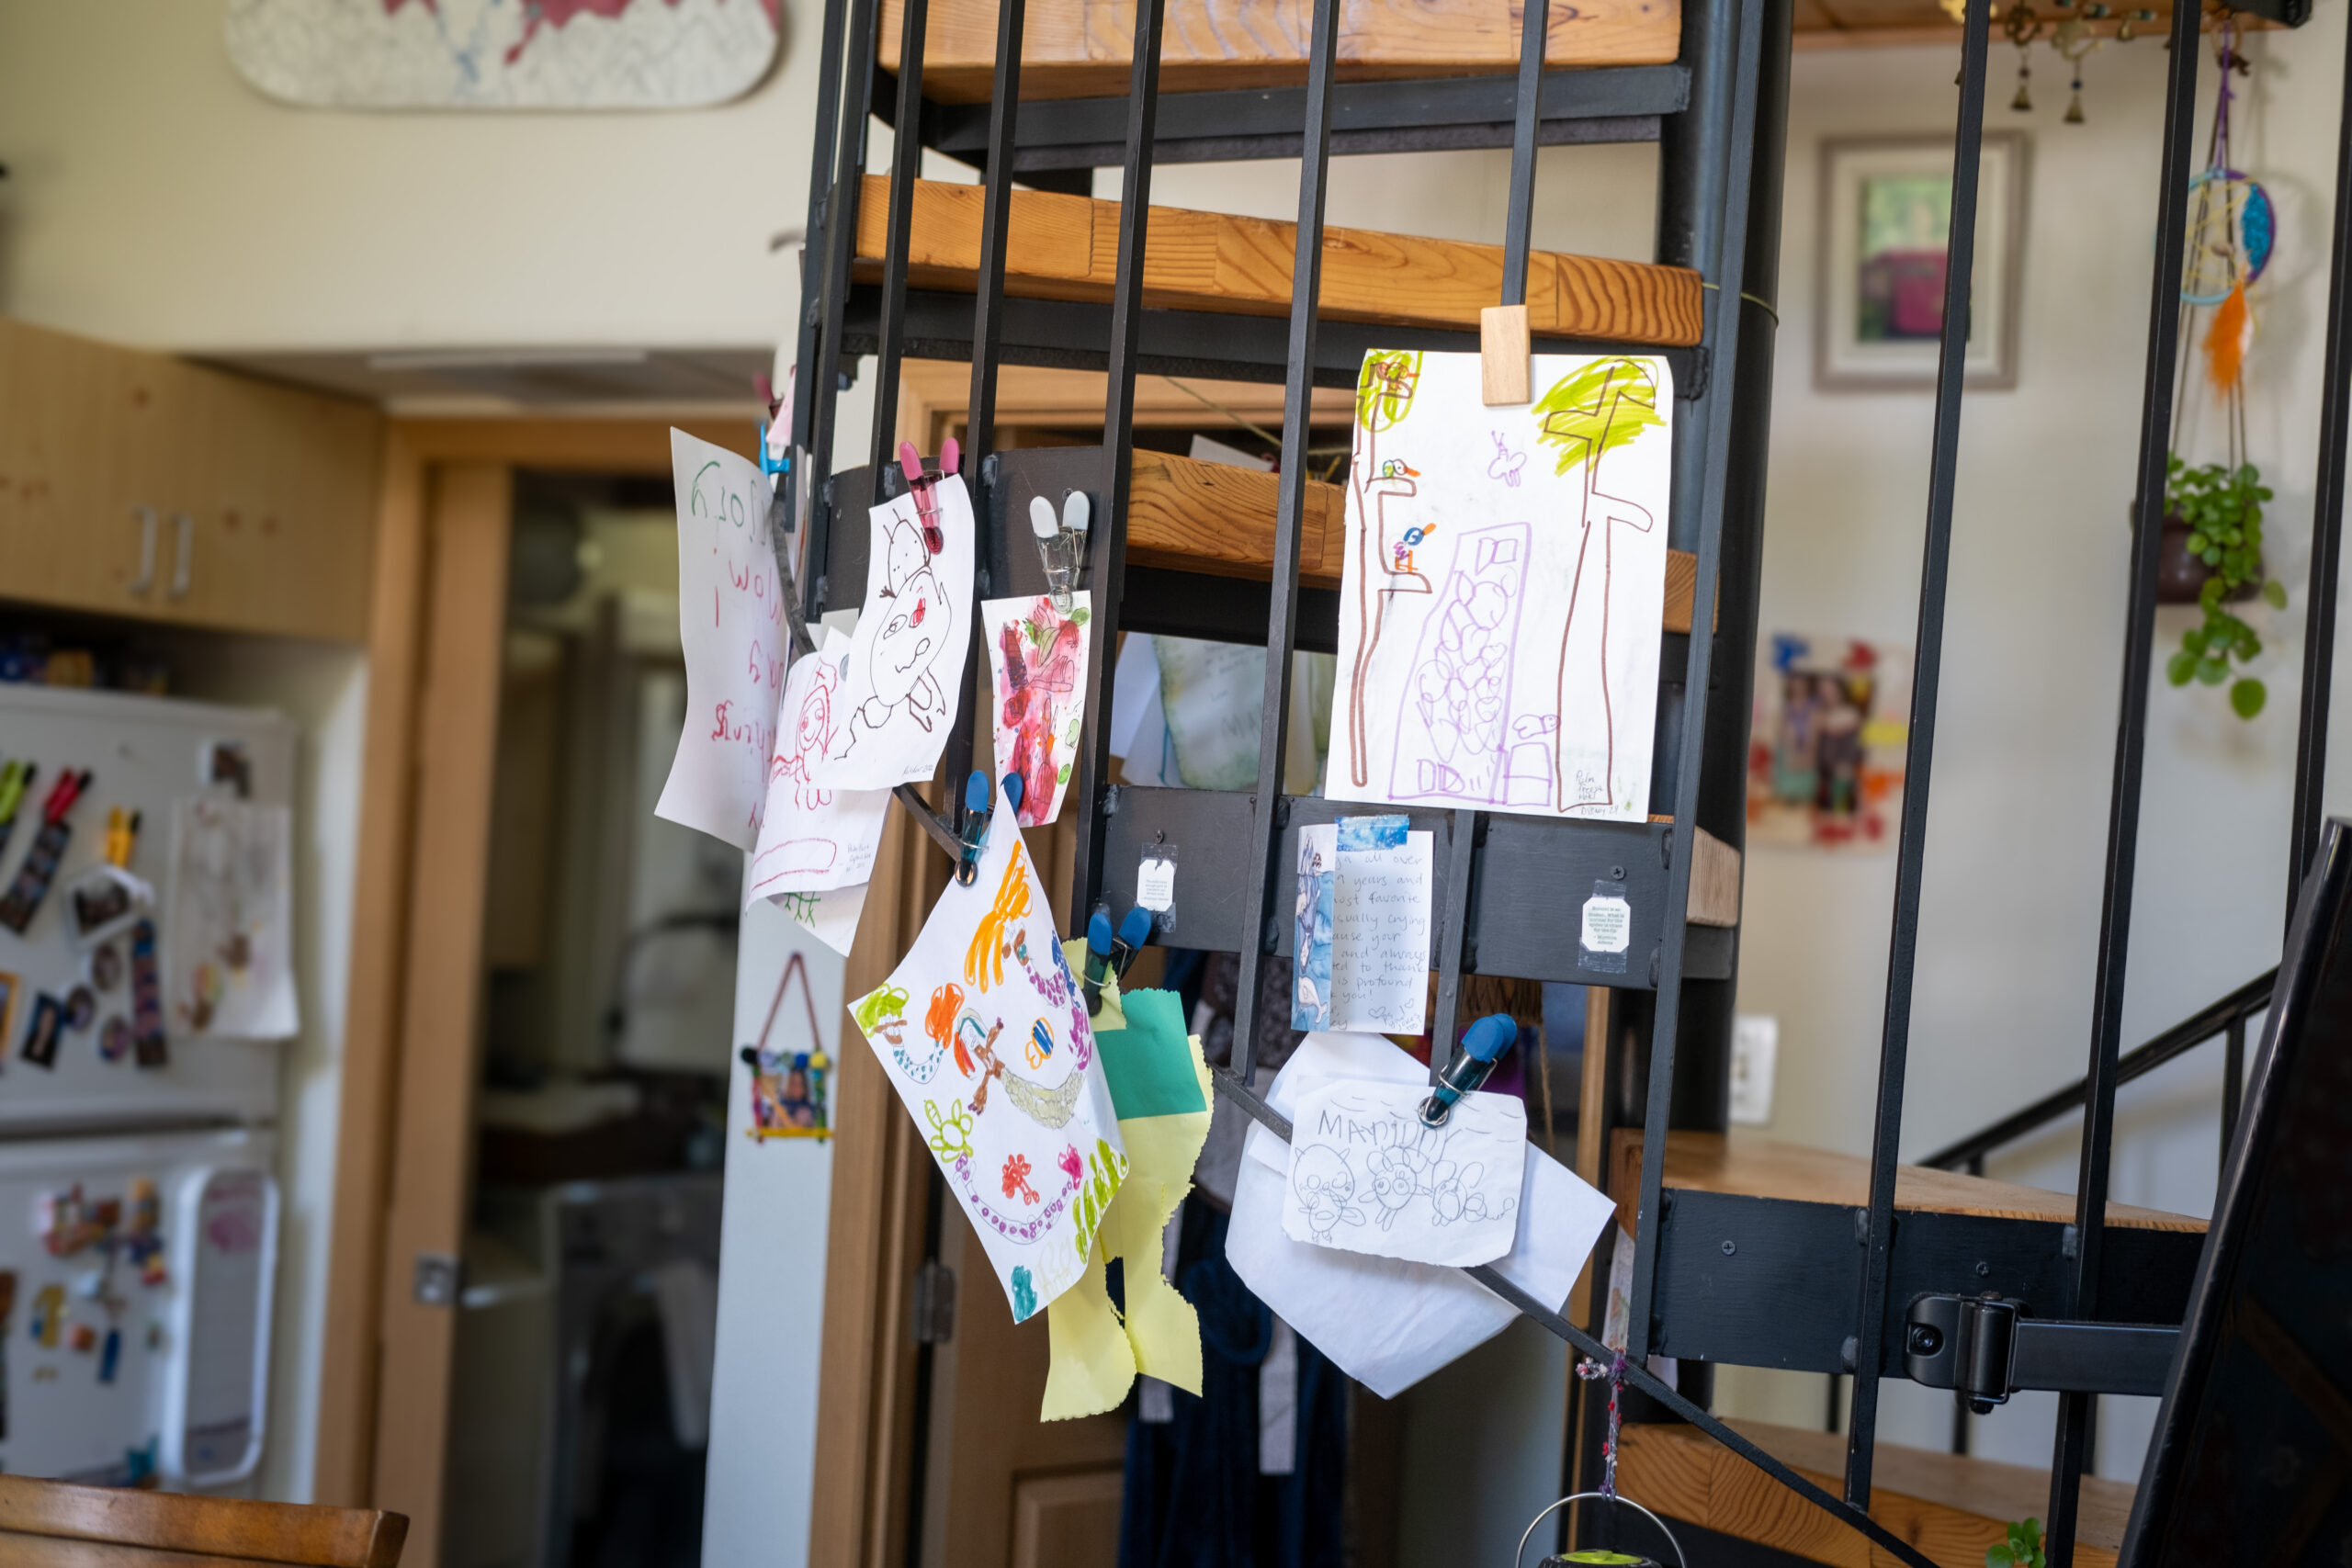 Several colorful children's drawings are pinned to a spiral staircase inside a home. A doorway and fridge with lots of pictures on it are in the background.